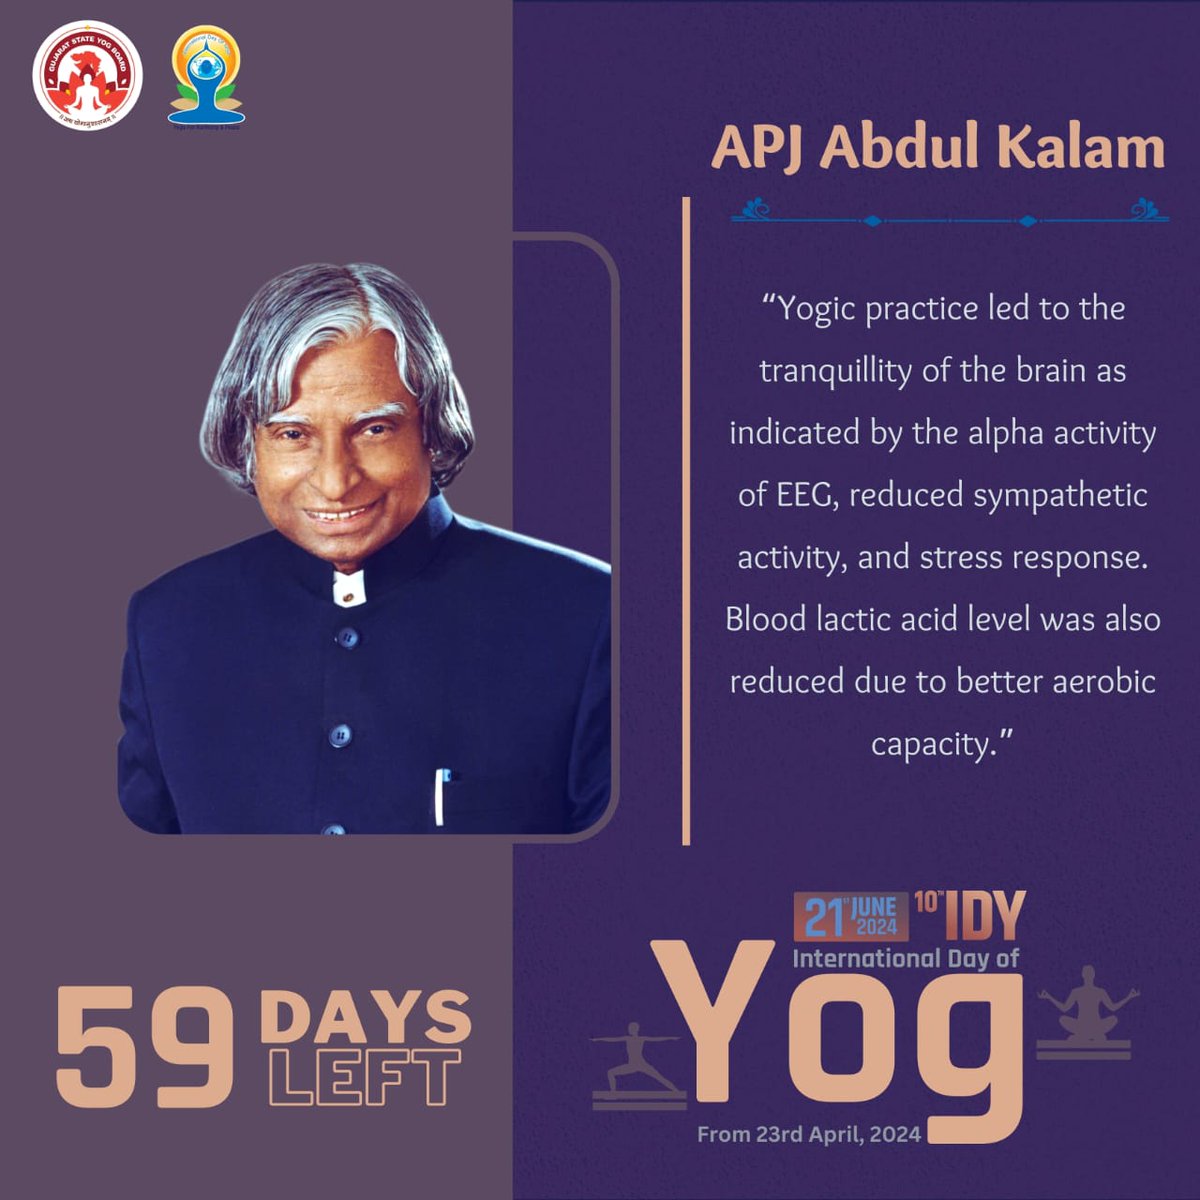 “Yogic practice led to the tranquillity of the brain as indicated by the alpha activity of EEG, reduced sympathetic activity, and stress response. 

59 Days left to International Day of Yoga 2024

#GujaratStateYogBoard #YogmayGujarat #yogkaamrutkal #IDY2024